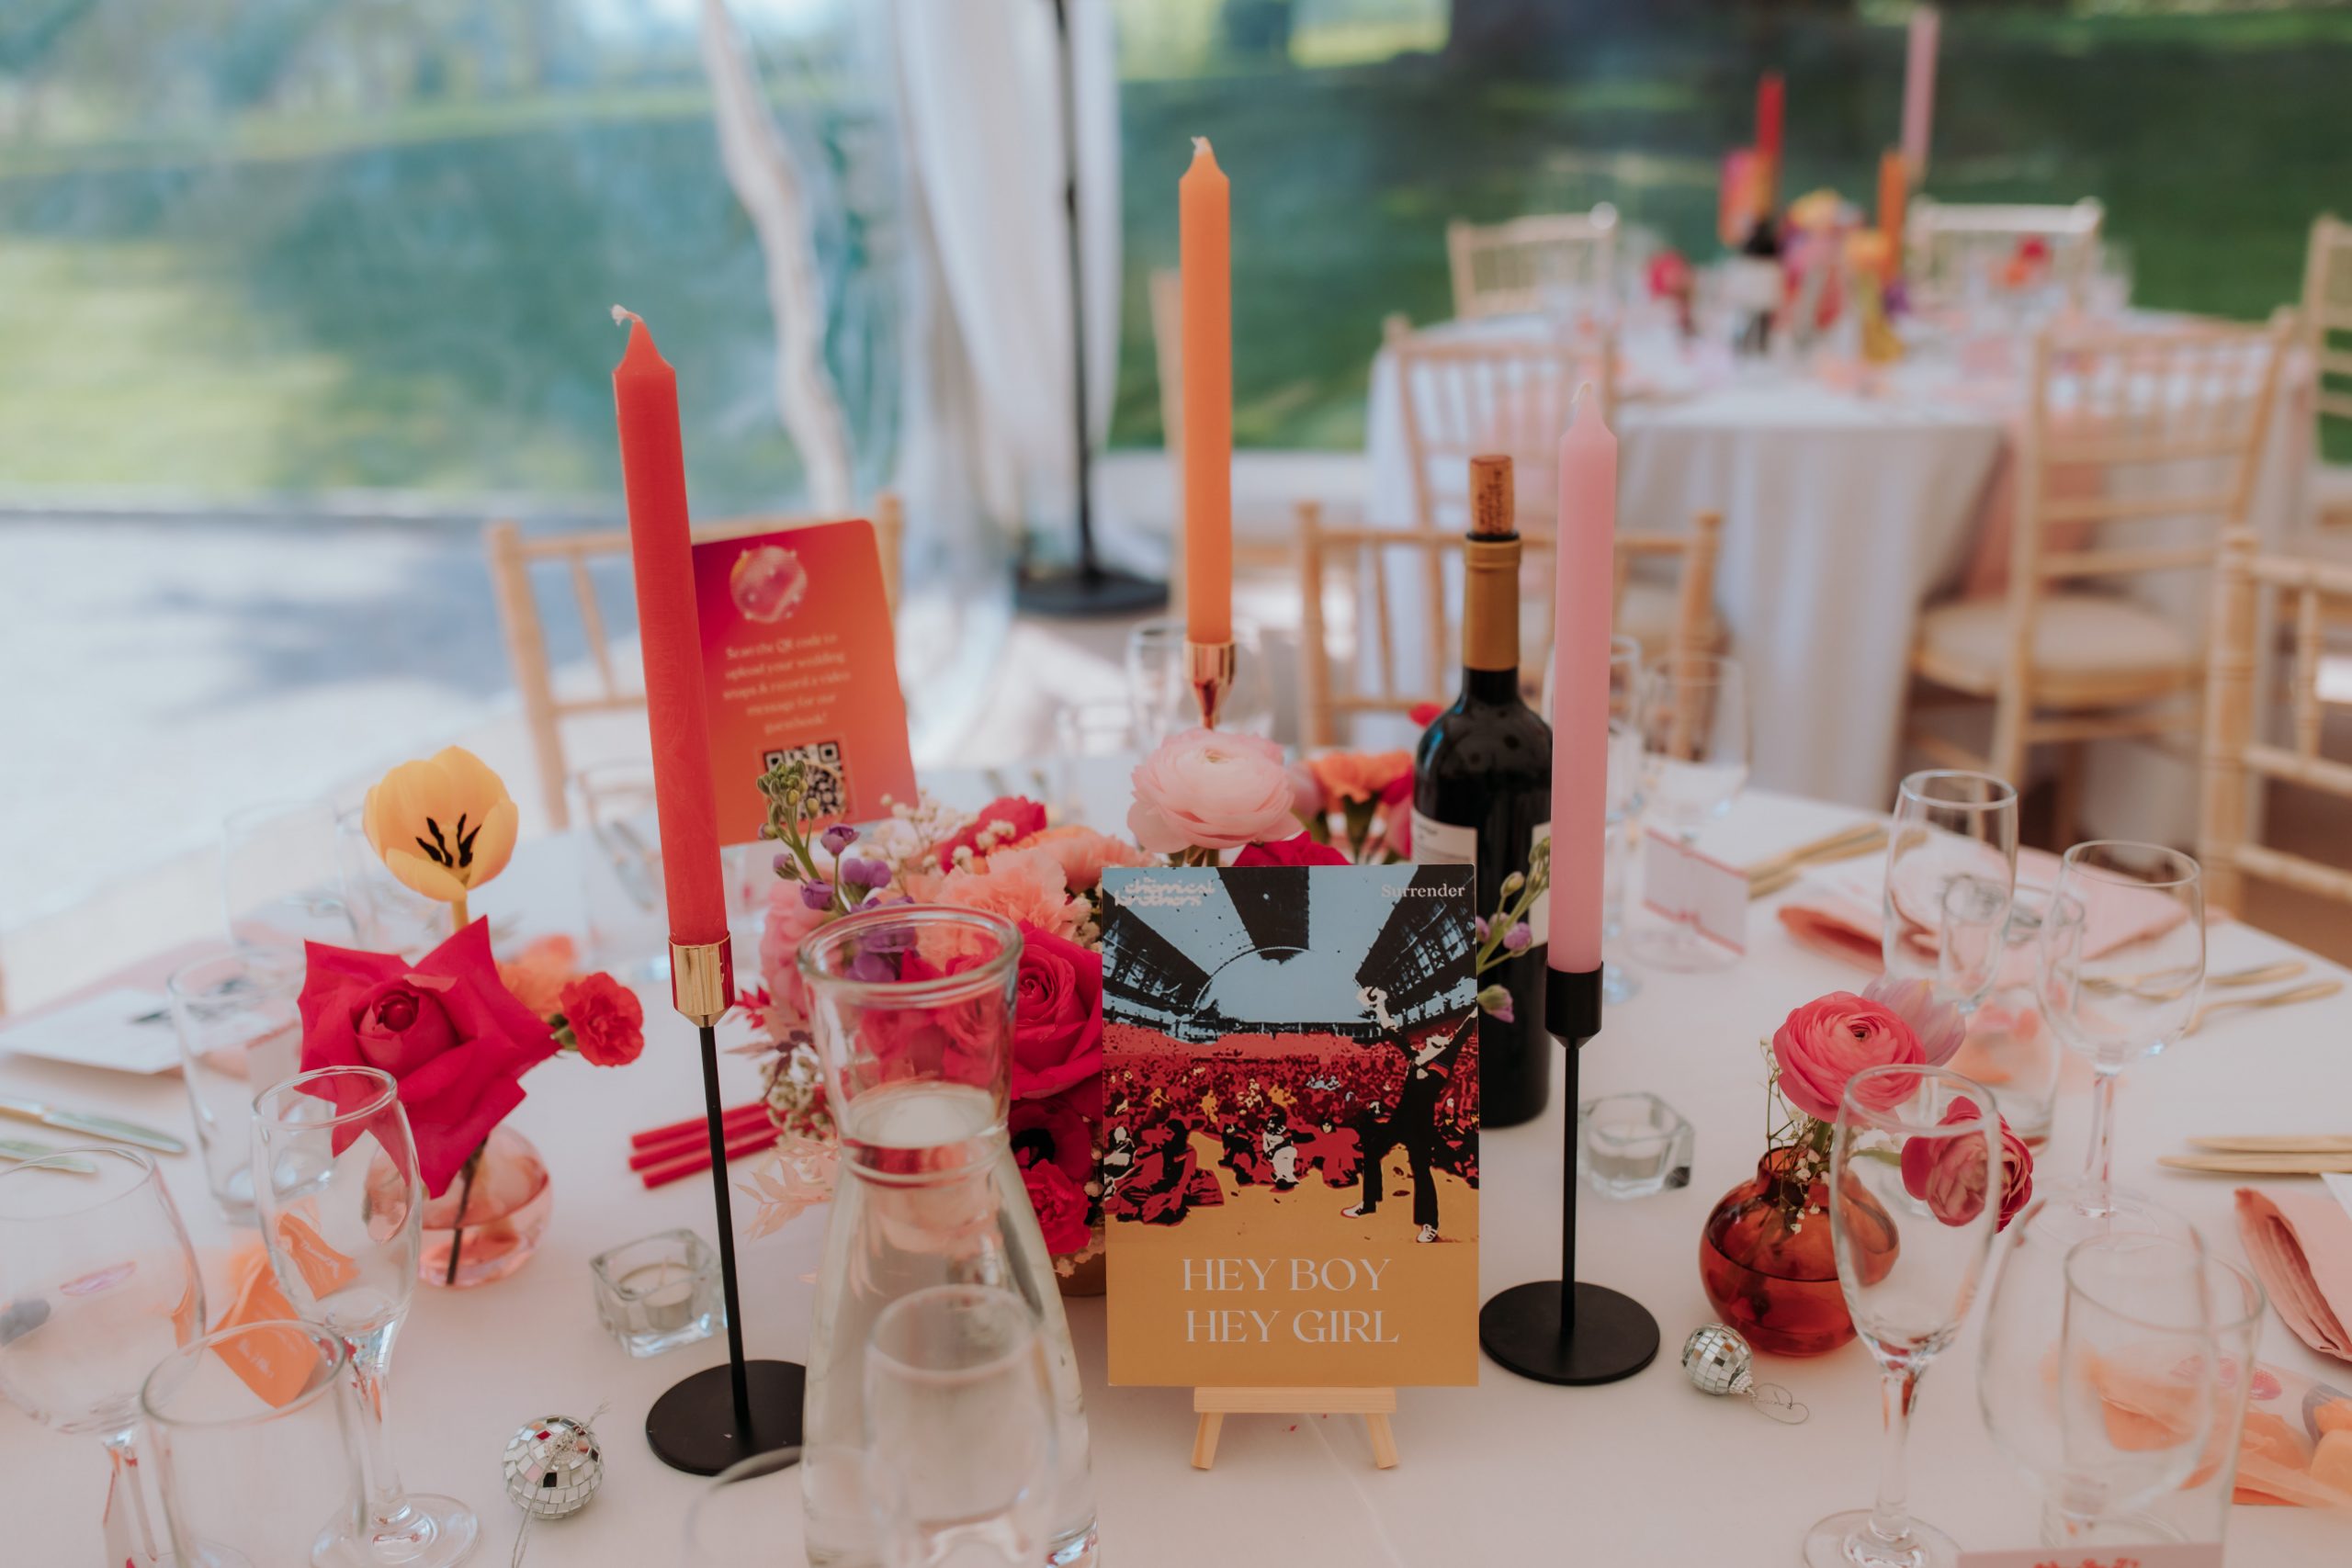 a colourful table design with lots of pink and oraneg flowers. The table name is hey boy hey girl album cover